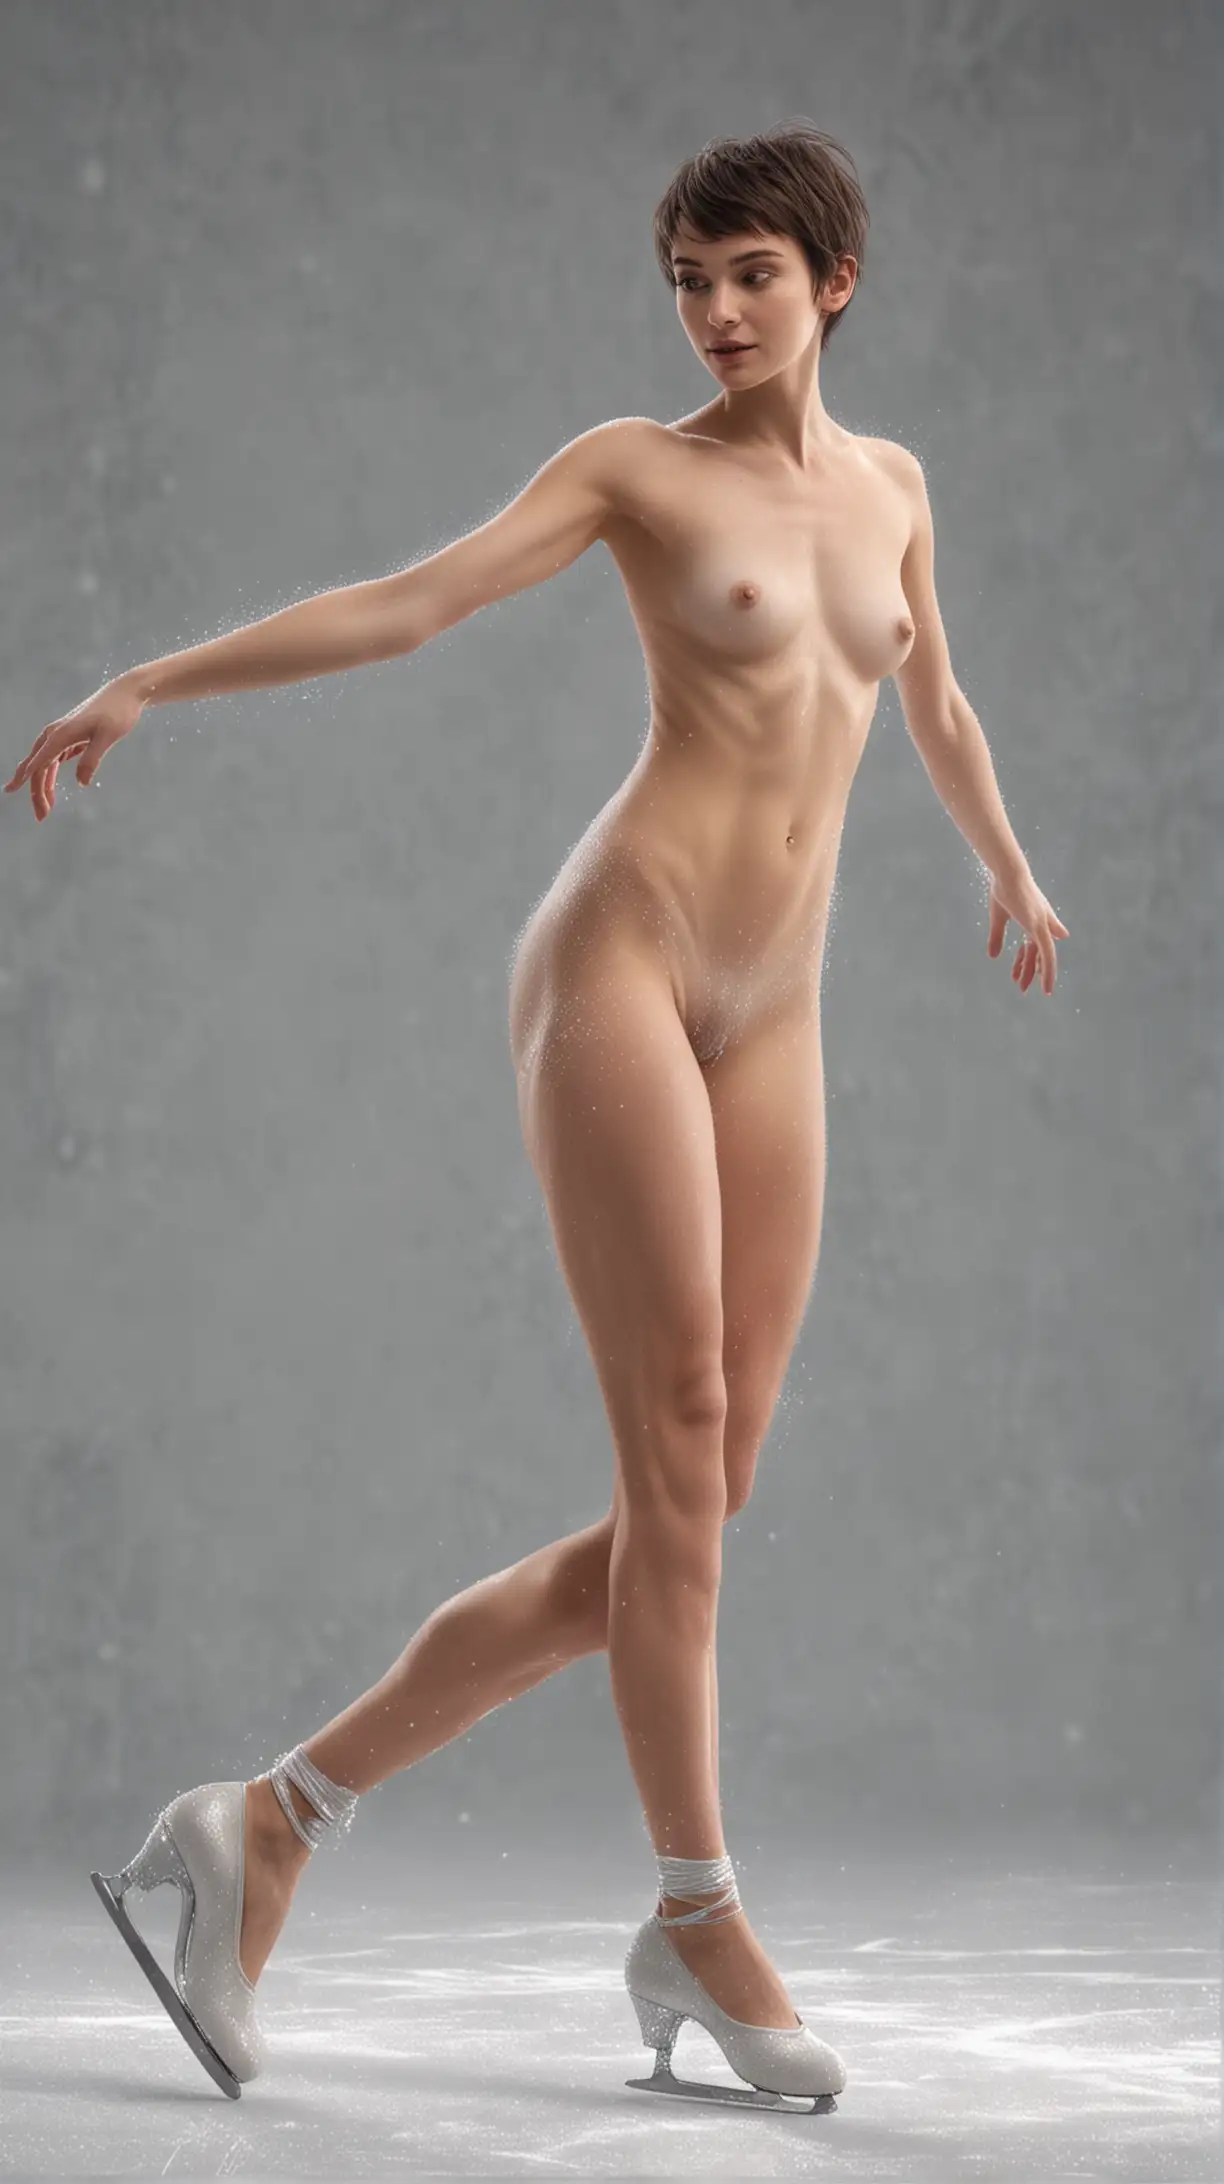 hyperrealistic image, maximum details:
short haired naked beautiful young skinny girl doing dance moves while she is ice skating